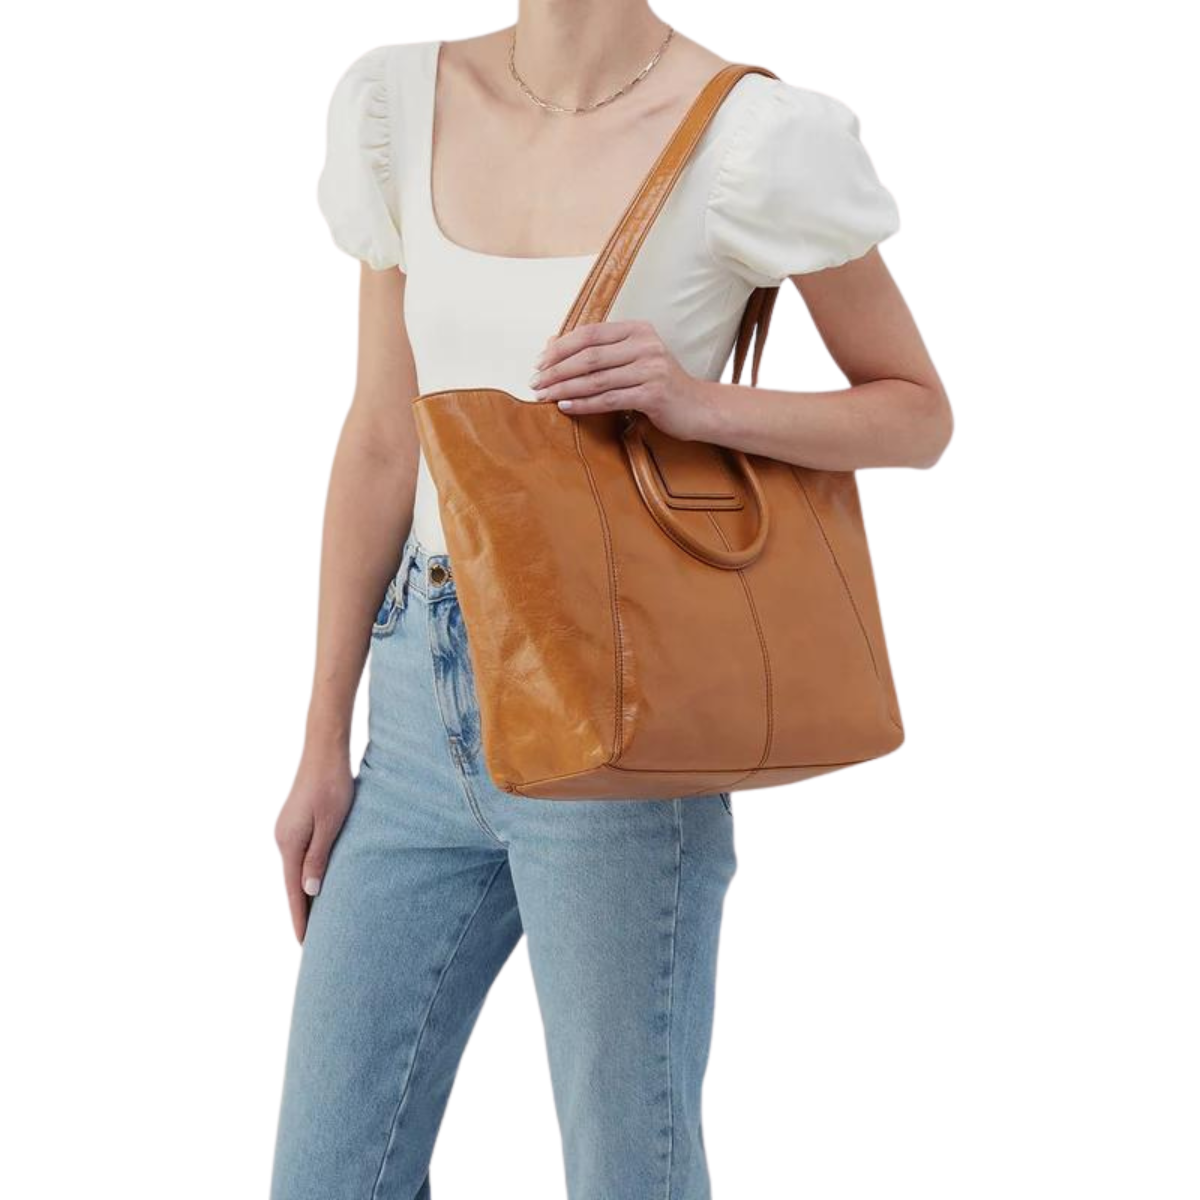 Hobo Sheila East-West Tote in Natural